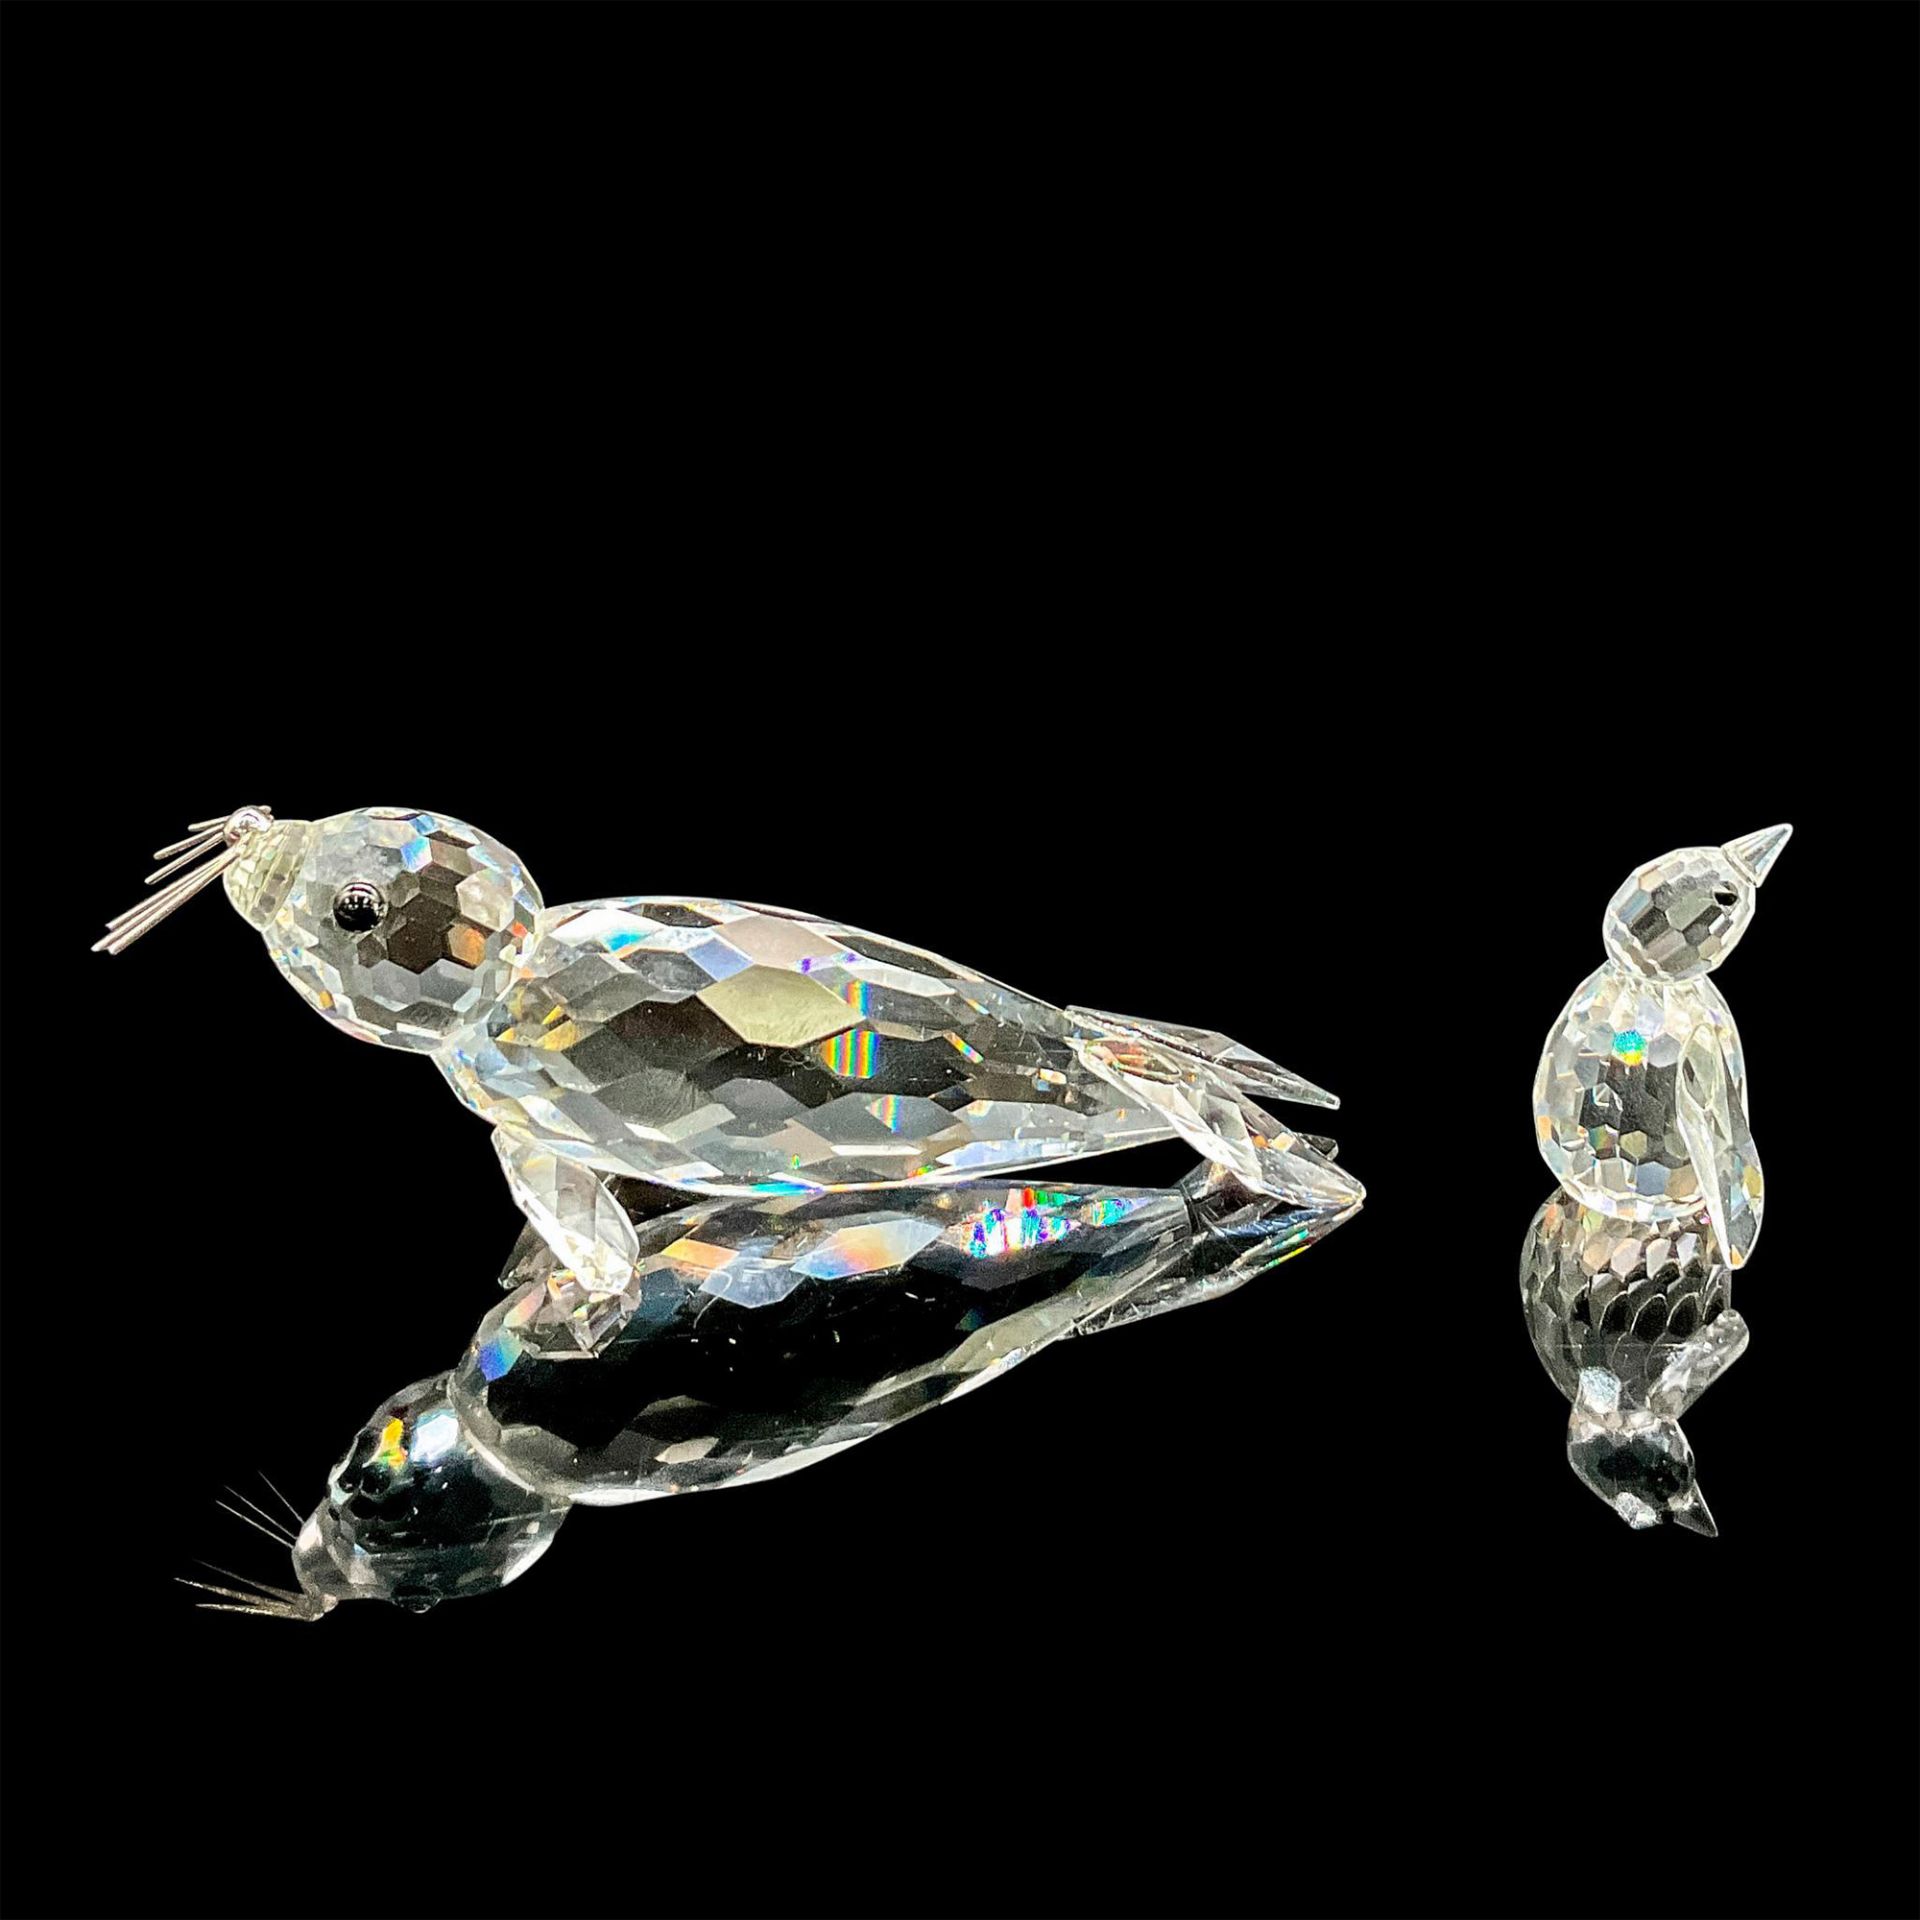 2pc Swarovski Silver Crystal Figurines, Seal and Penguin - Image 2 of 3